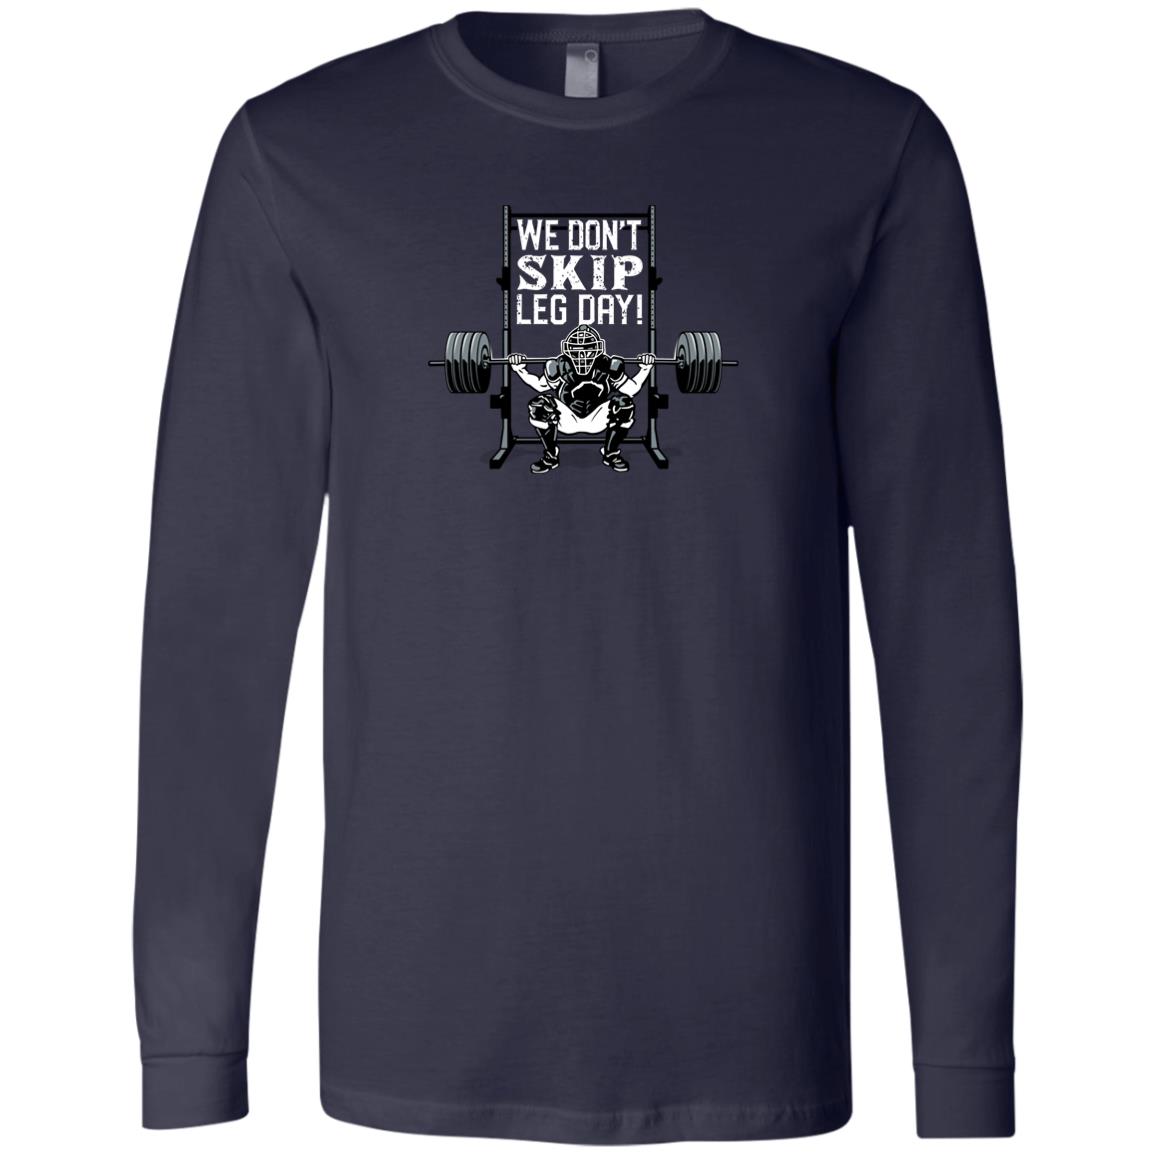 The-Catching-Guy-weight-long-sleeve-tee-catcher-grey